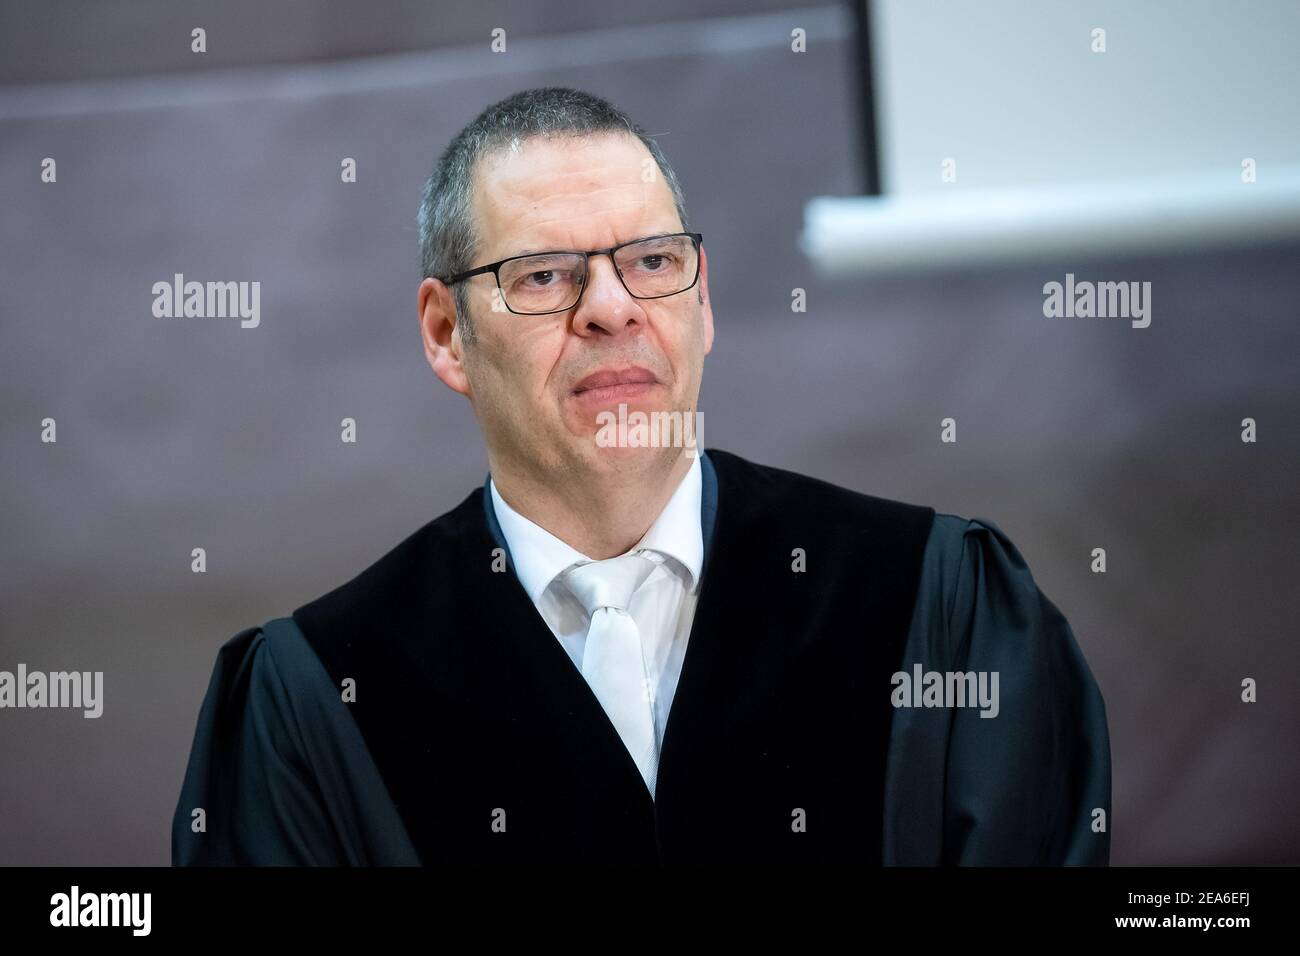 08 February 2021, Lower Saxony, Verden: Volker Stronczyk, presiding judge, stands before the start of the trial in the town hall of Verden. Three defendants are accused of tying up a 19-year-old and sinking her alive in the Weser River with a concrete slab. The prosecution accuses the two men and one woman of murder and forced prostitution. The victim was a 19-year-old, her body was recovered from the lock canal near Balge (Nienburg district) at the end of April. The accused are alleged to have first induced the mentally ill 19-year-old to engage in prostitution and later imprisoned her. In or Stock Photo